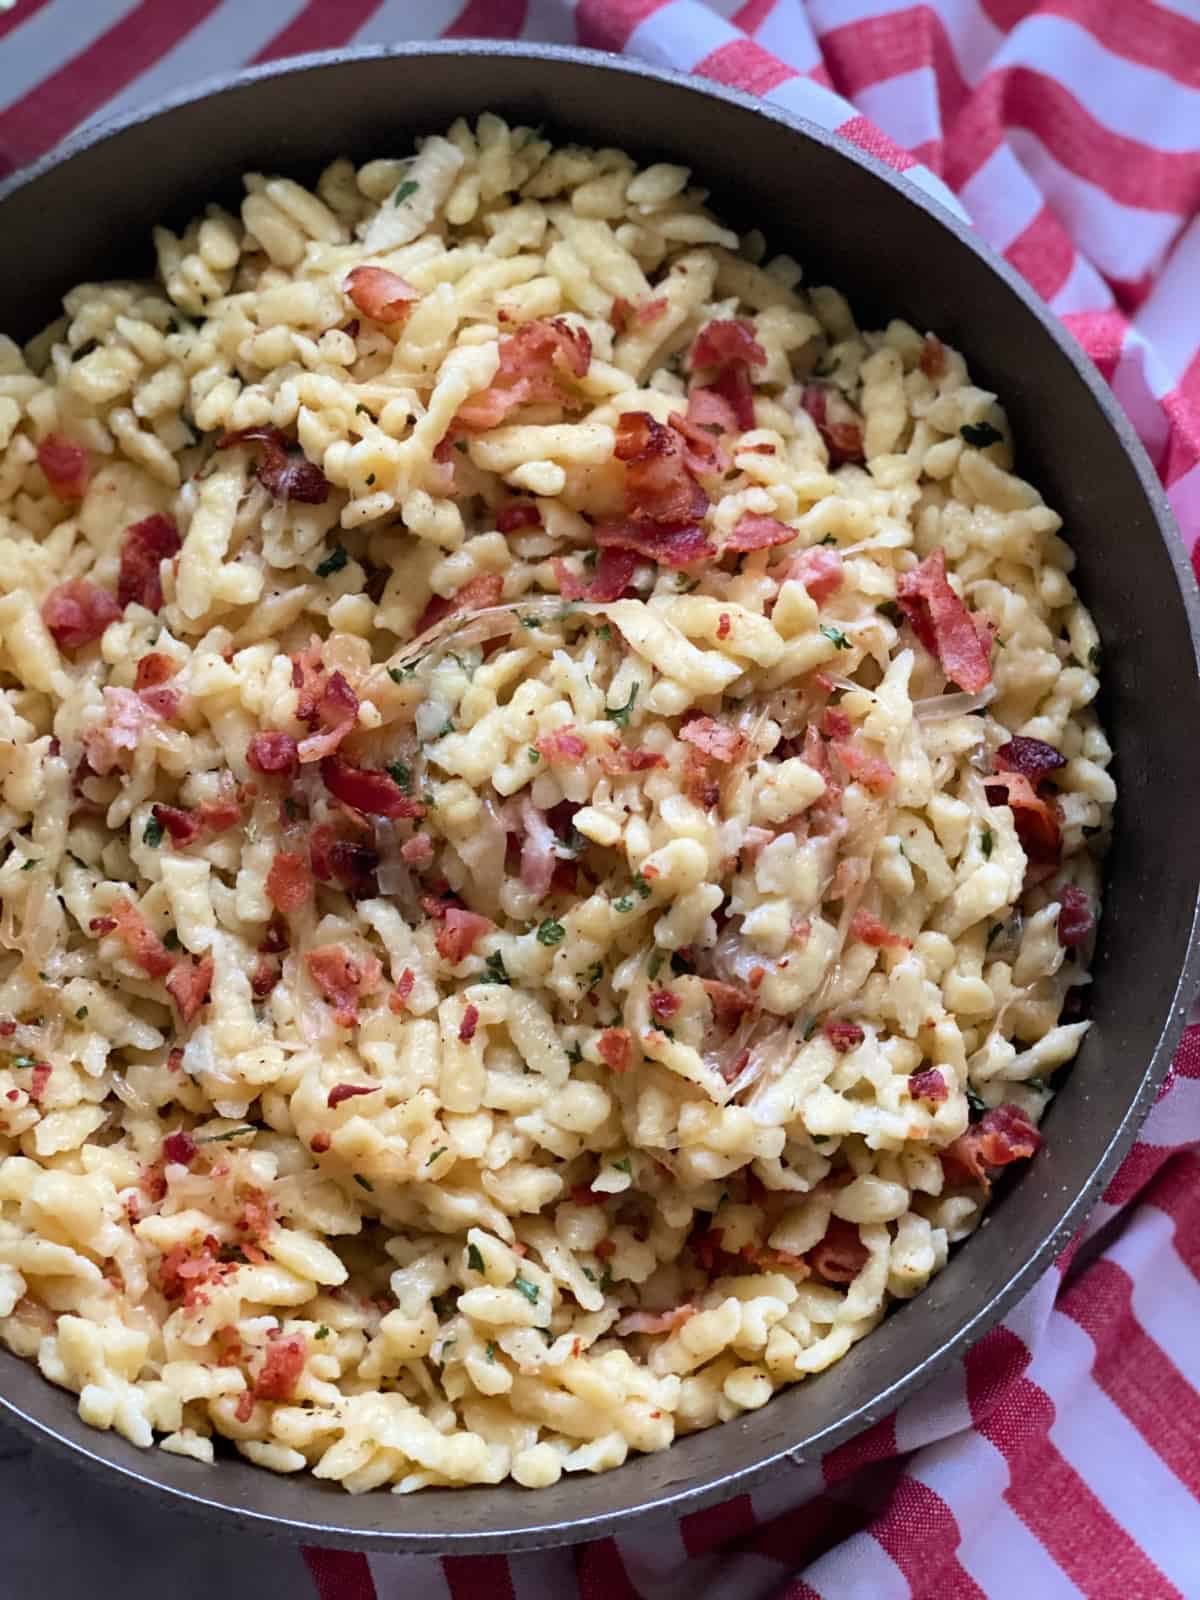 Top view of a skillet filled with bacon spatezle with a red and white cloth wrapped around it.